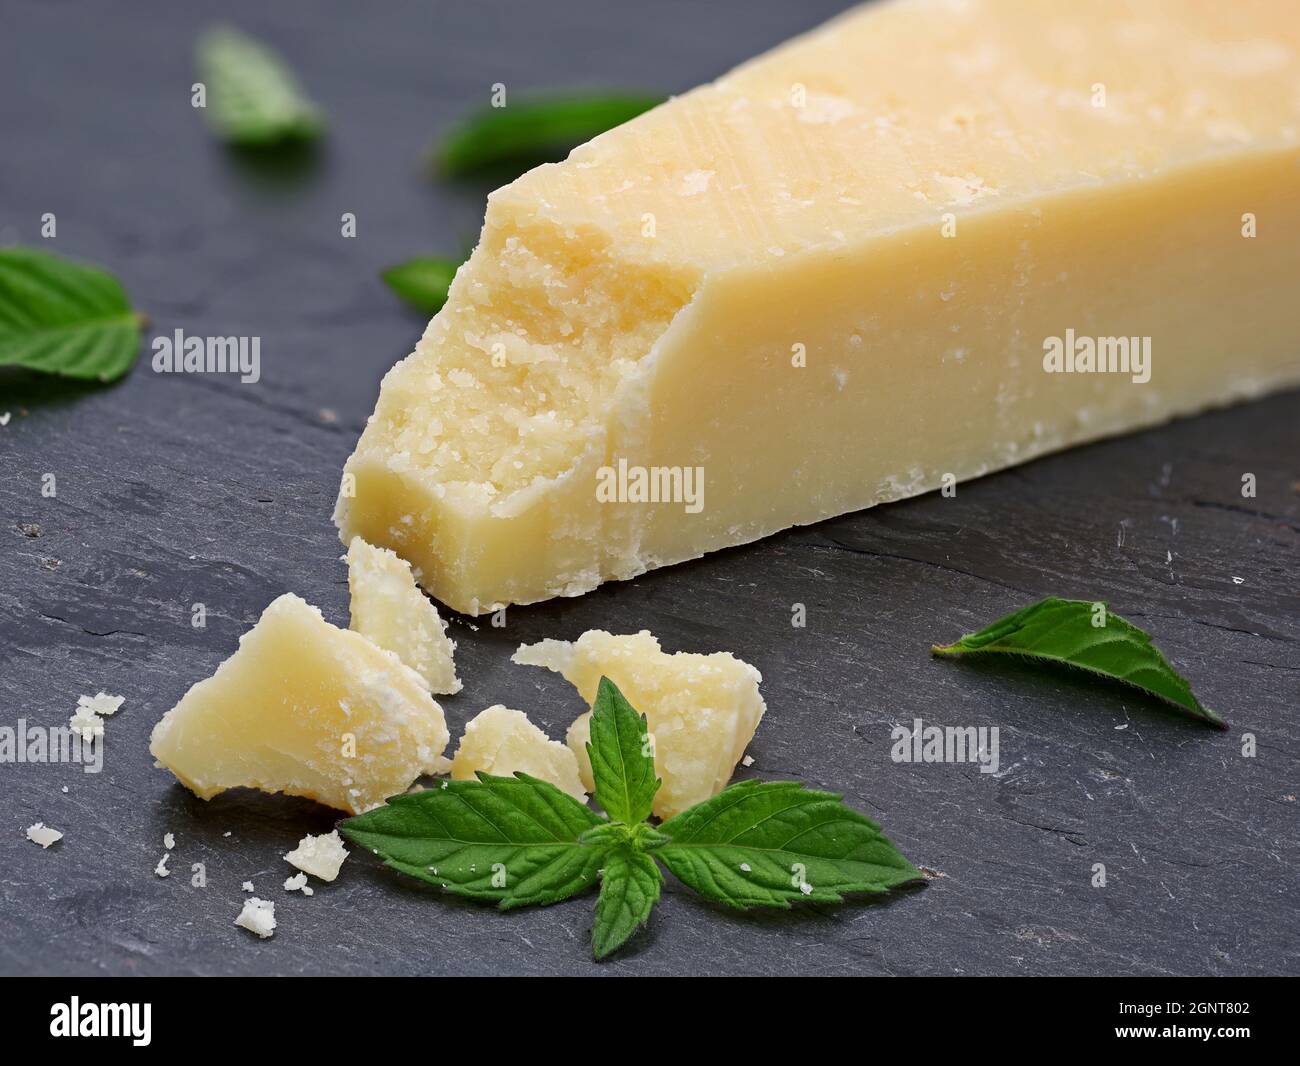 Pieces of delicious parmesan cheese on dark slate plate with green mint leaves, macro shot of parmigiano reggiano Stock Photo